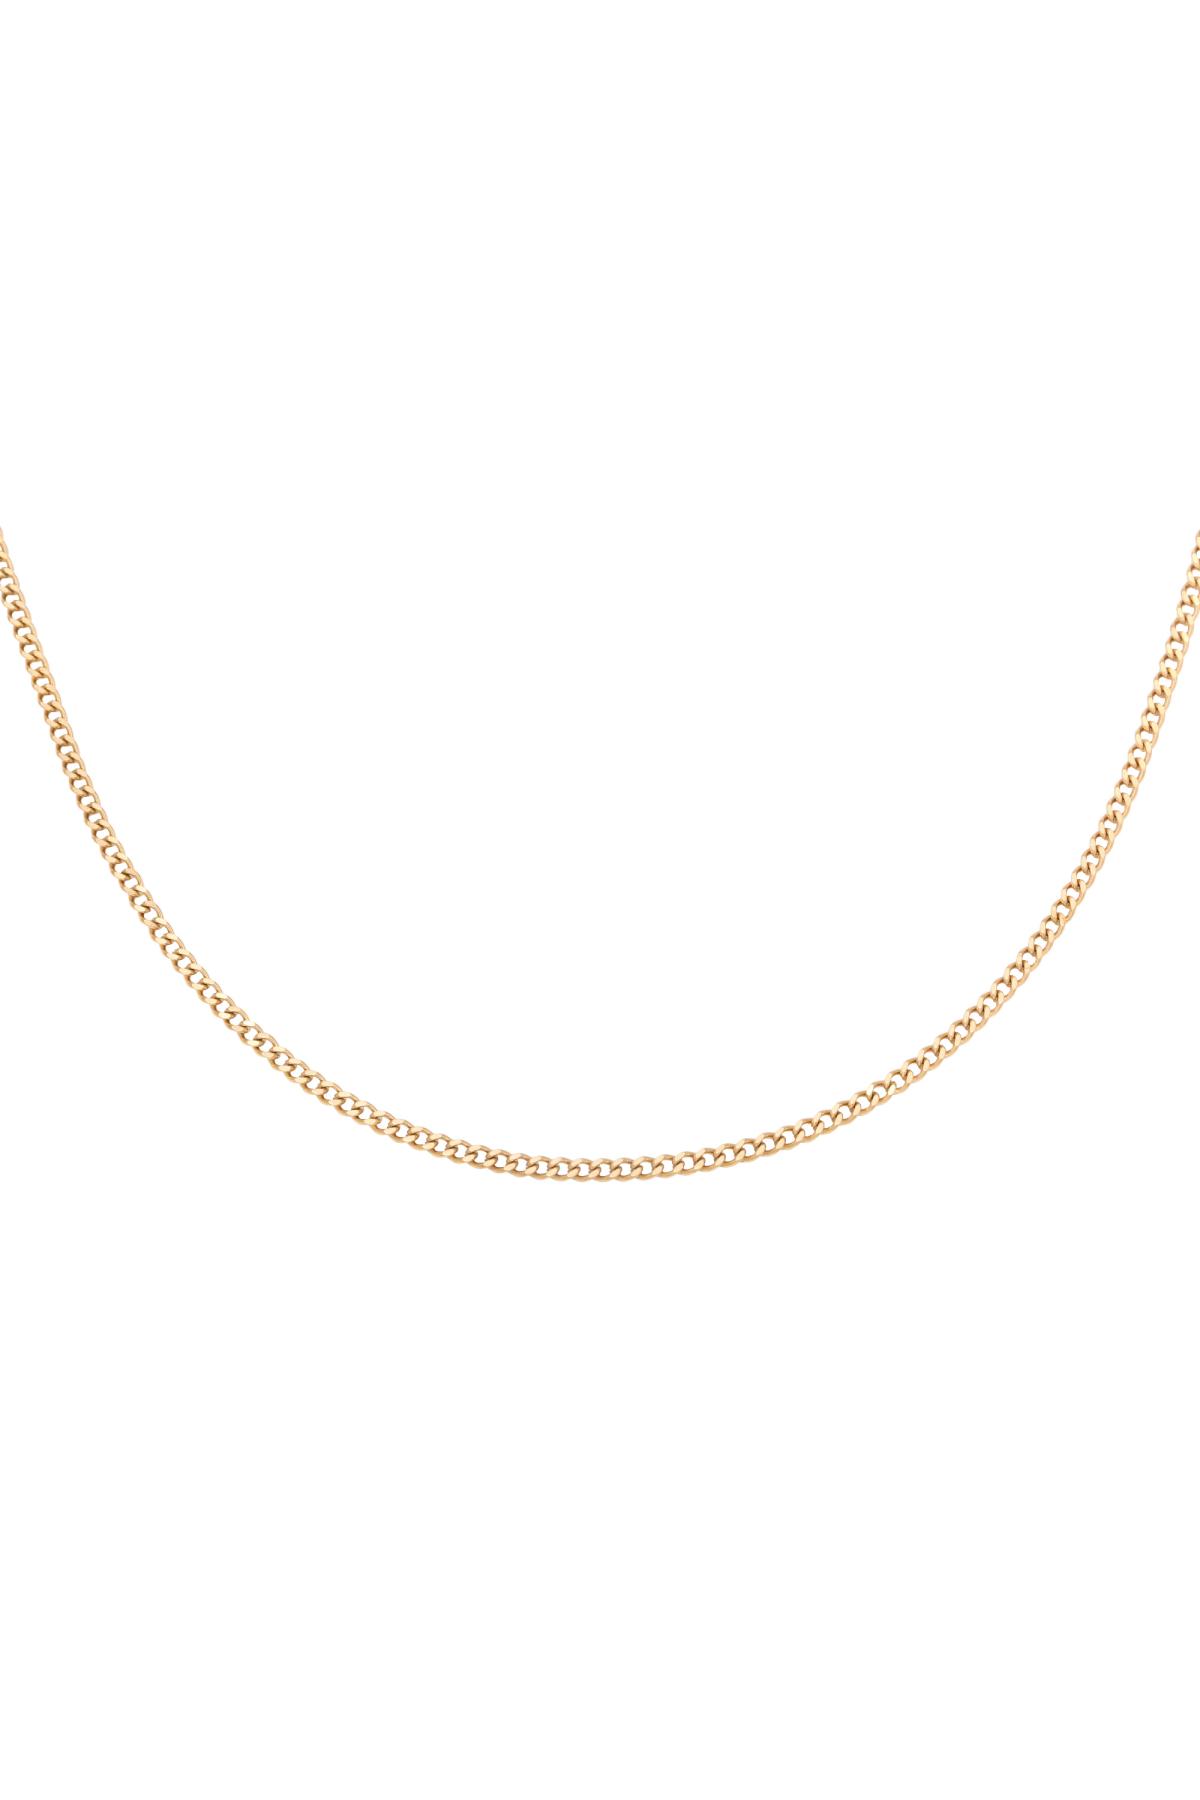 Necklace Tiny Plain Chains Gold Stainless Steel